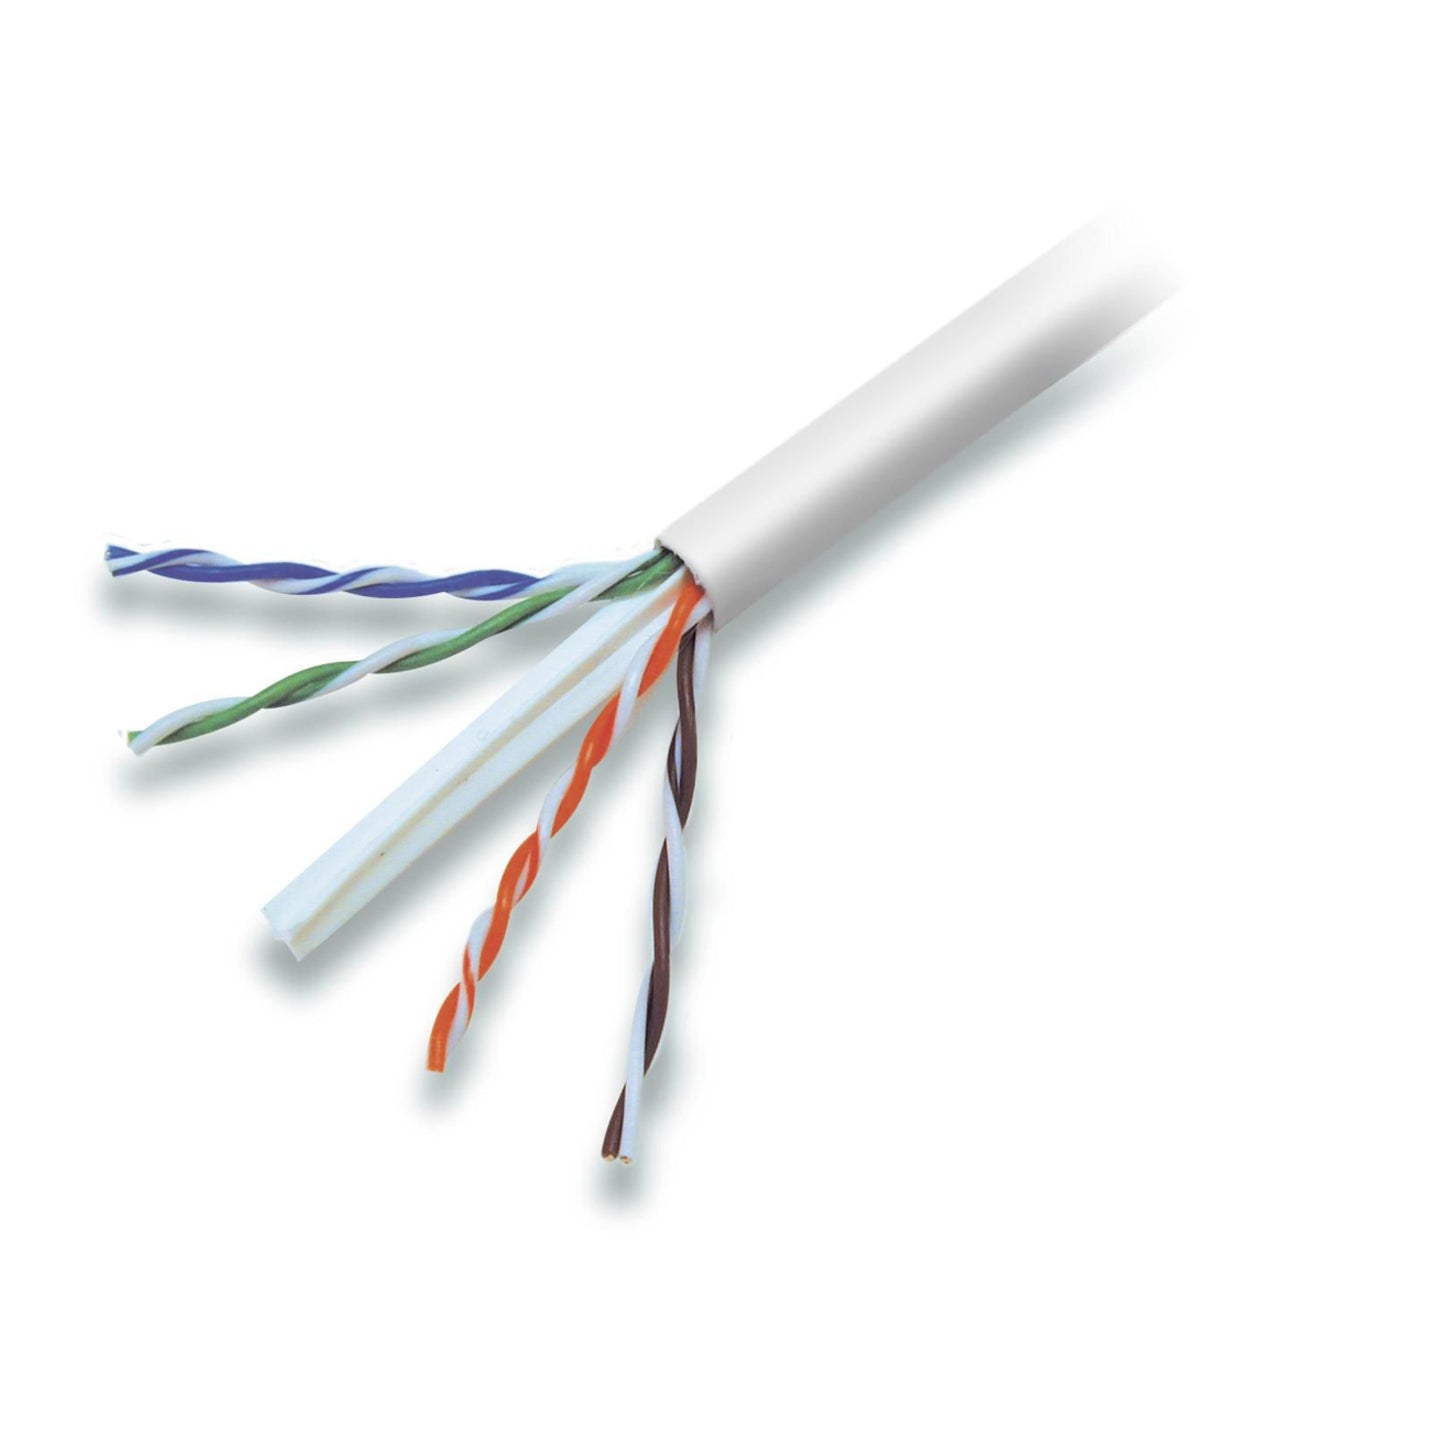 Belkin A7L704-1000WH-P Cat. 6 High Performance UTP Bulk Cable (Bare wire), 1000 ft, White